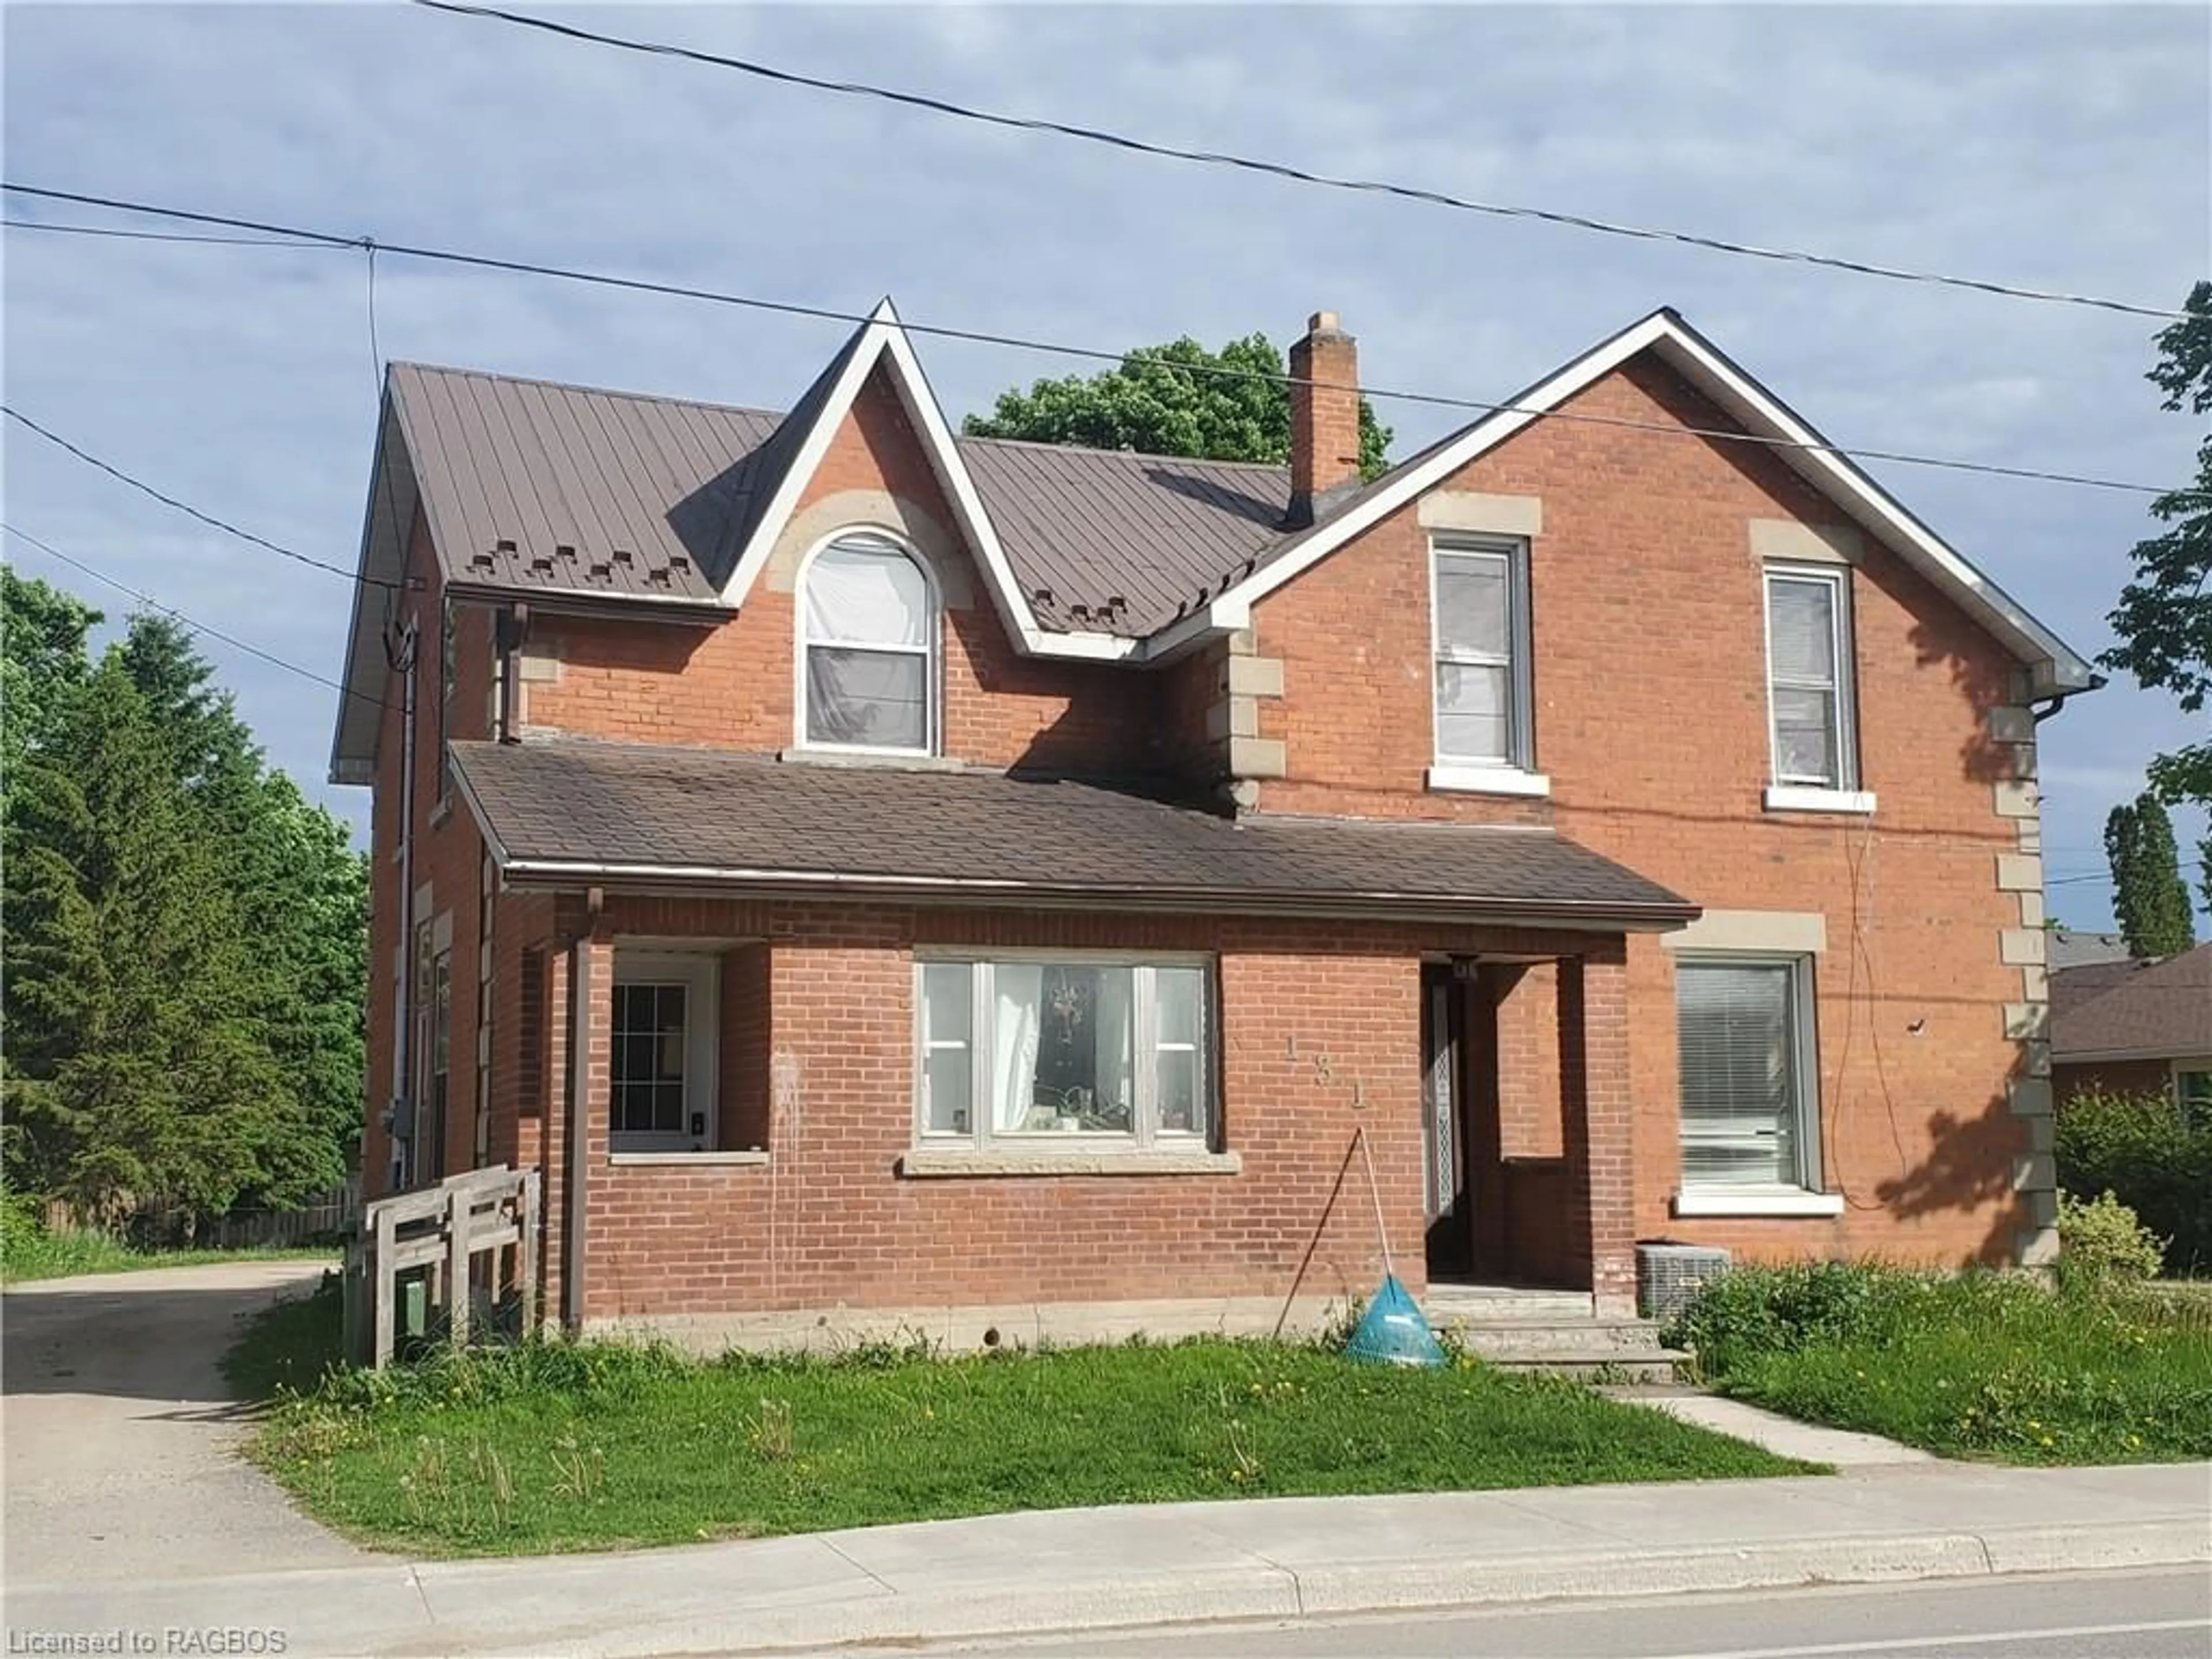 Home with brick exterior material for 131 Main St, Southgate Ontario N0C 1B0